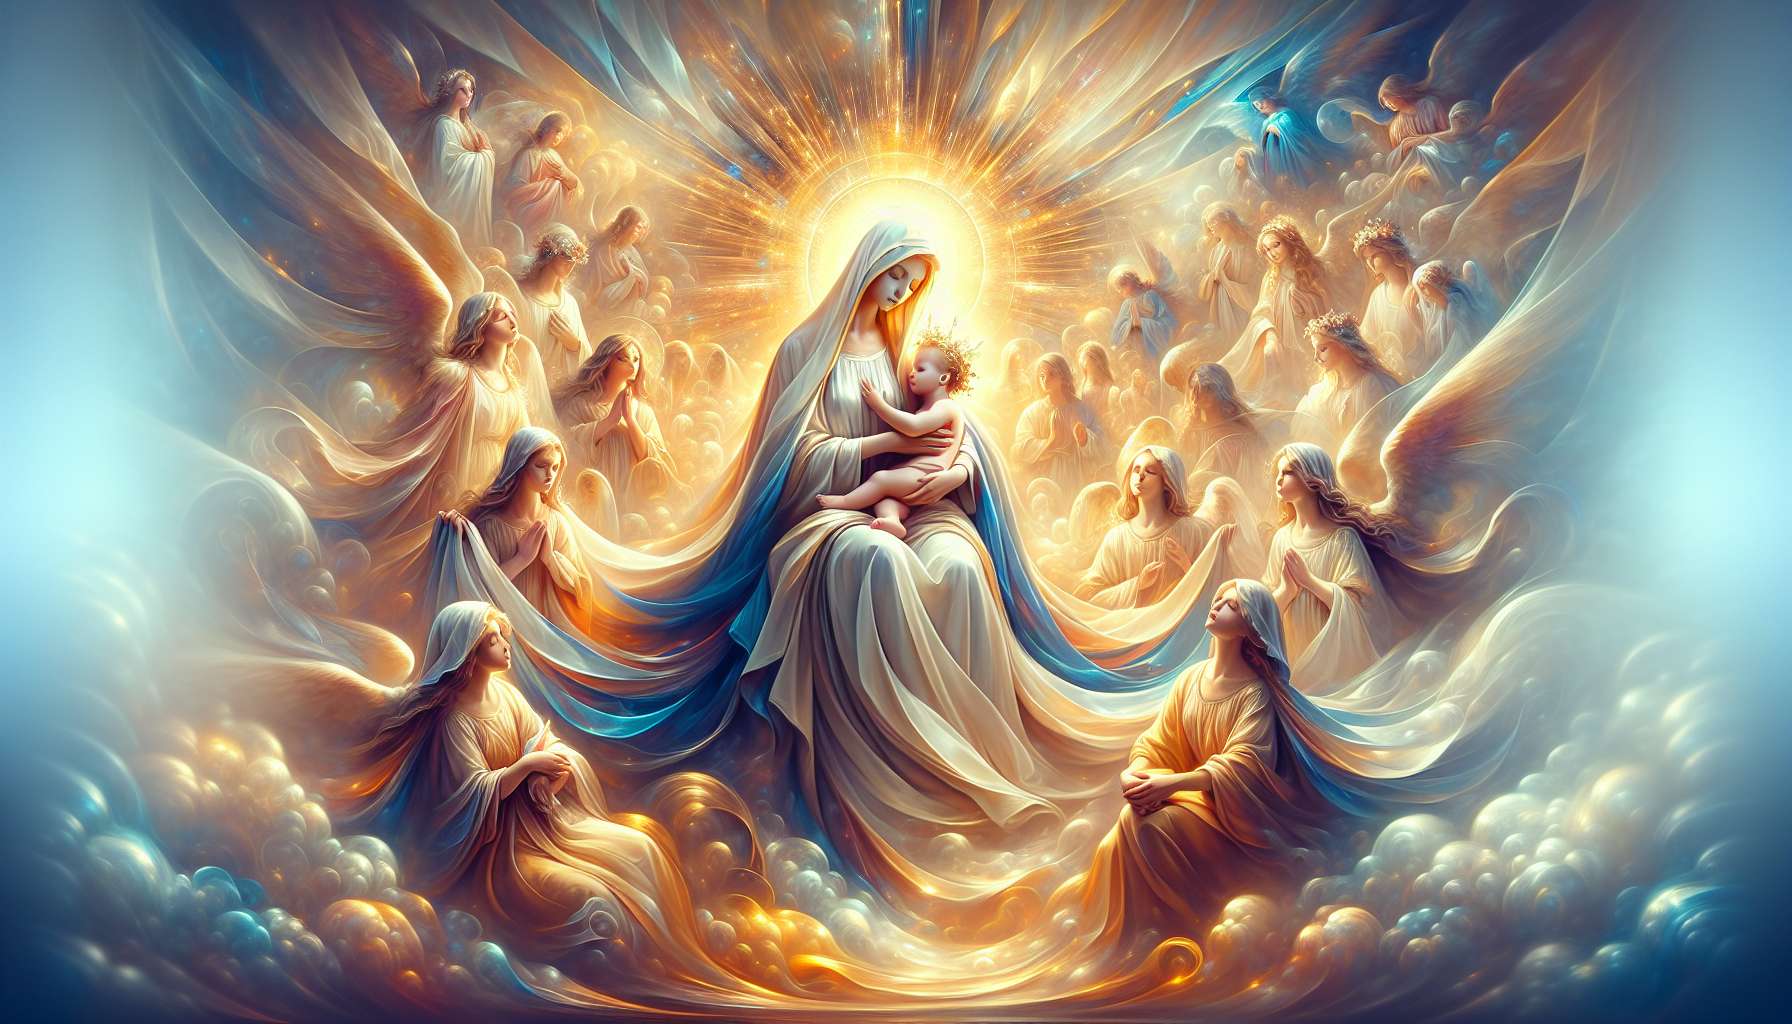 A serene, sacred image of the Solemnity of Santa María, Mother of God: Santa María is depicted in flowing, celestial robes, with a soft, radiant glow surrounding her. She is cradling the infant Jesus